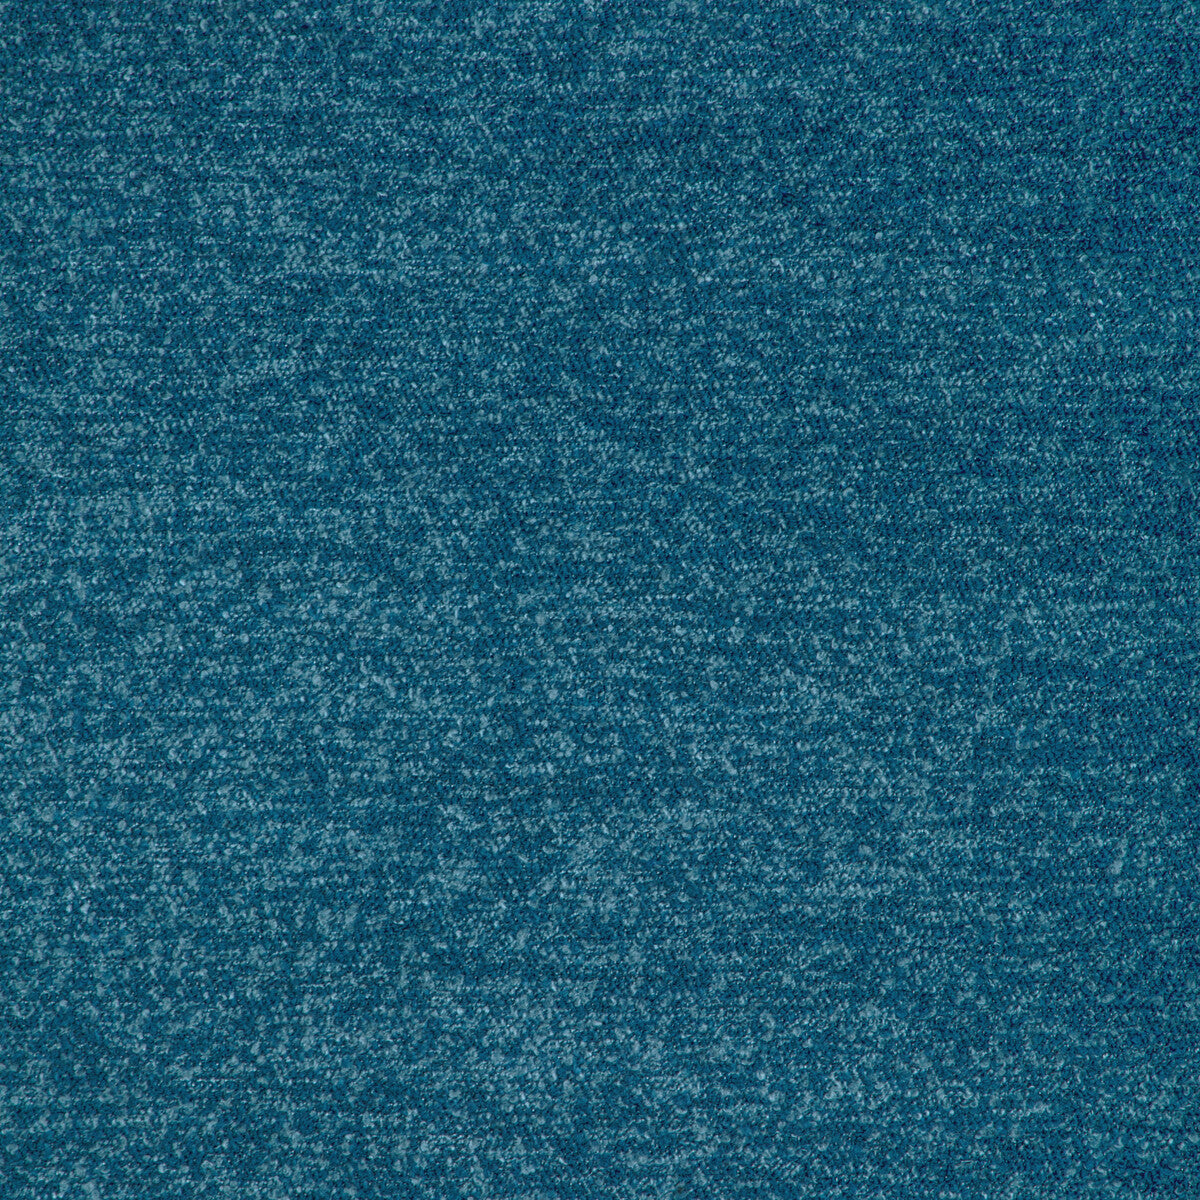 Rohe Boucle fabric in indigo color - pattern 36952.5.0 - by Kravet Basics in the Mid-Century Modern collection